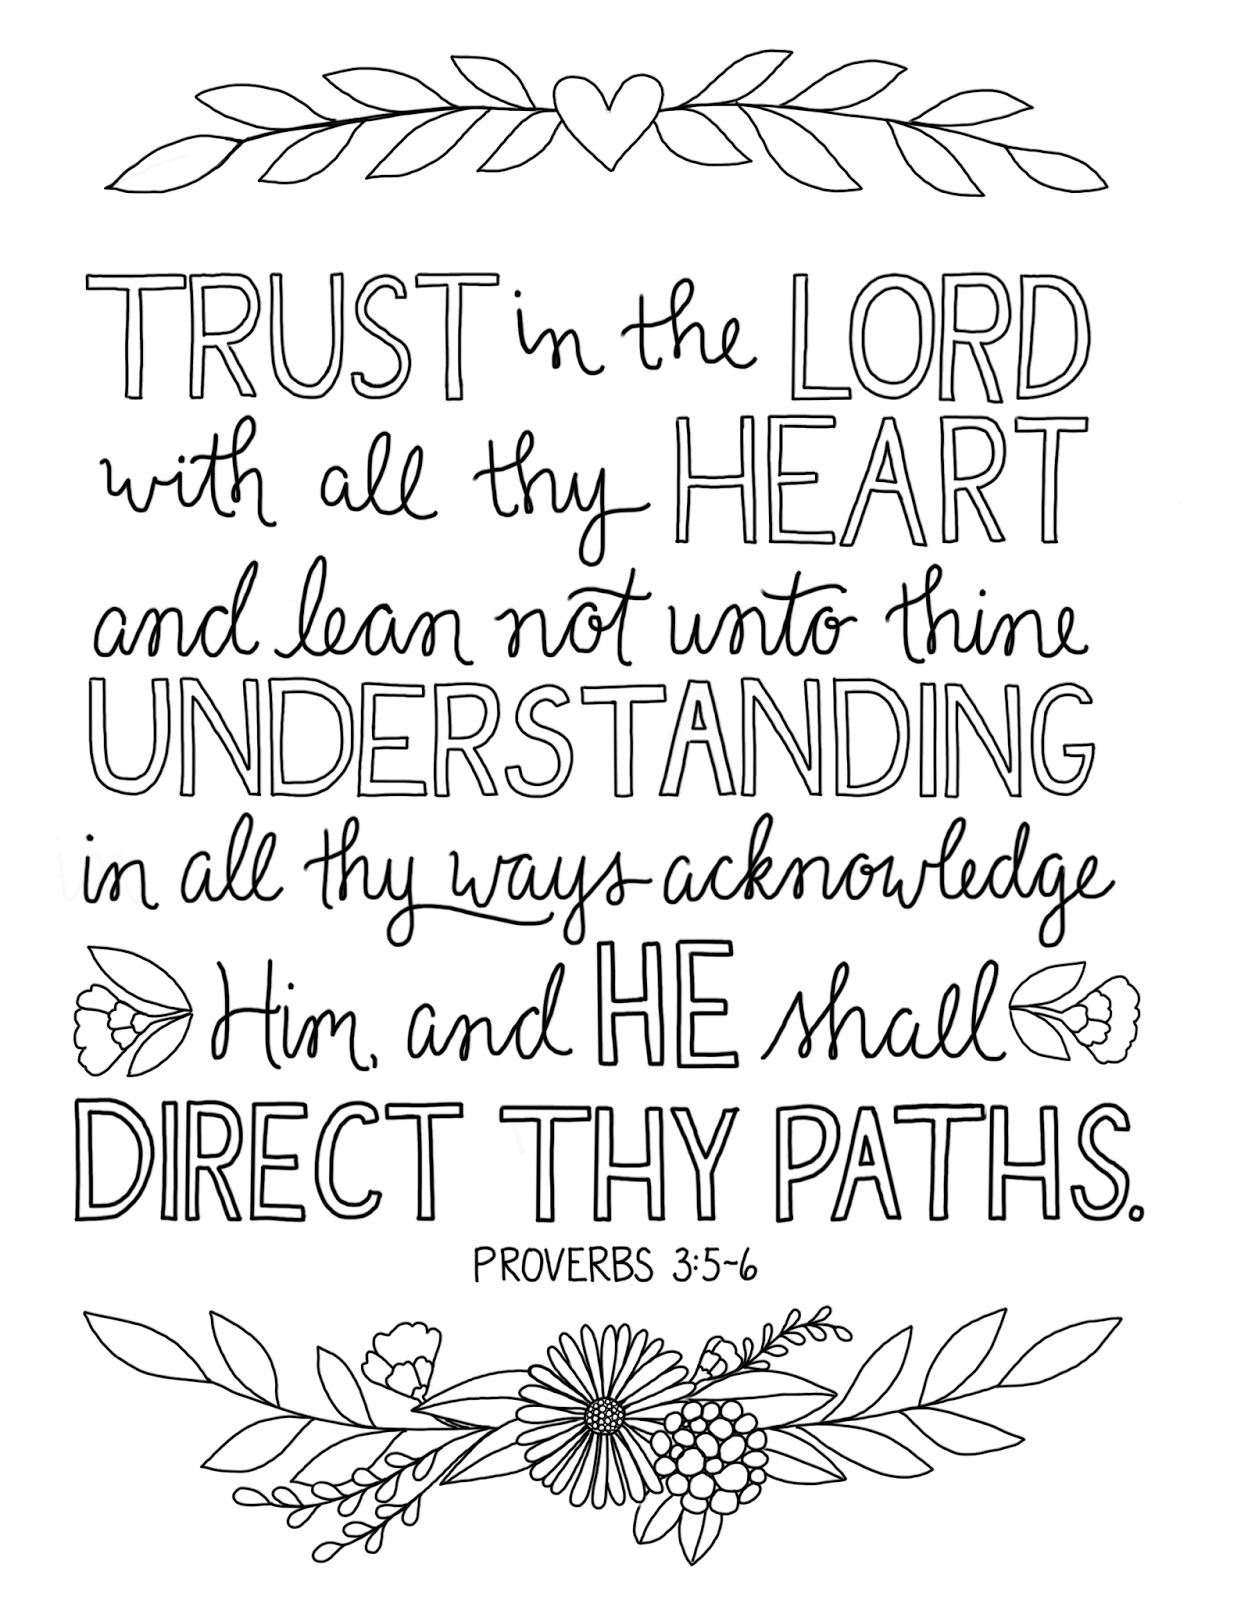 Printable Bible Coloring Pages With Verses
 just what i squeeze in Trust in the Lord Coloring